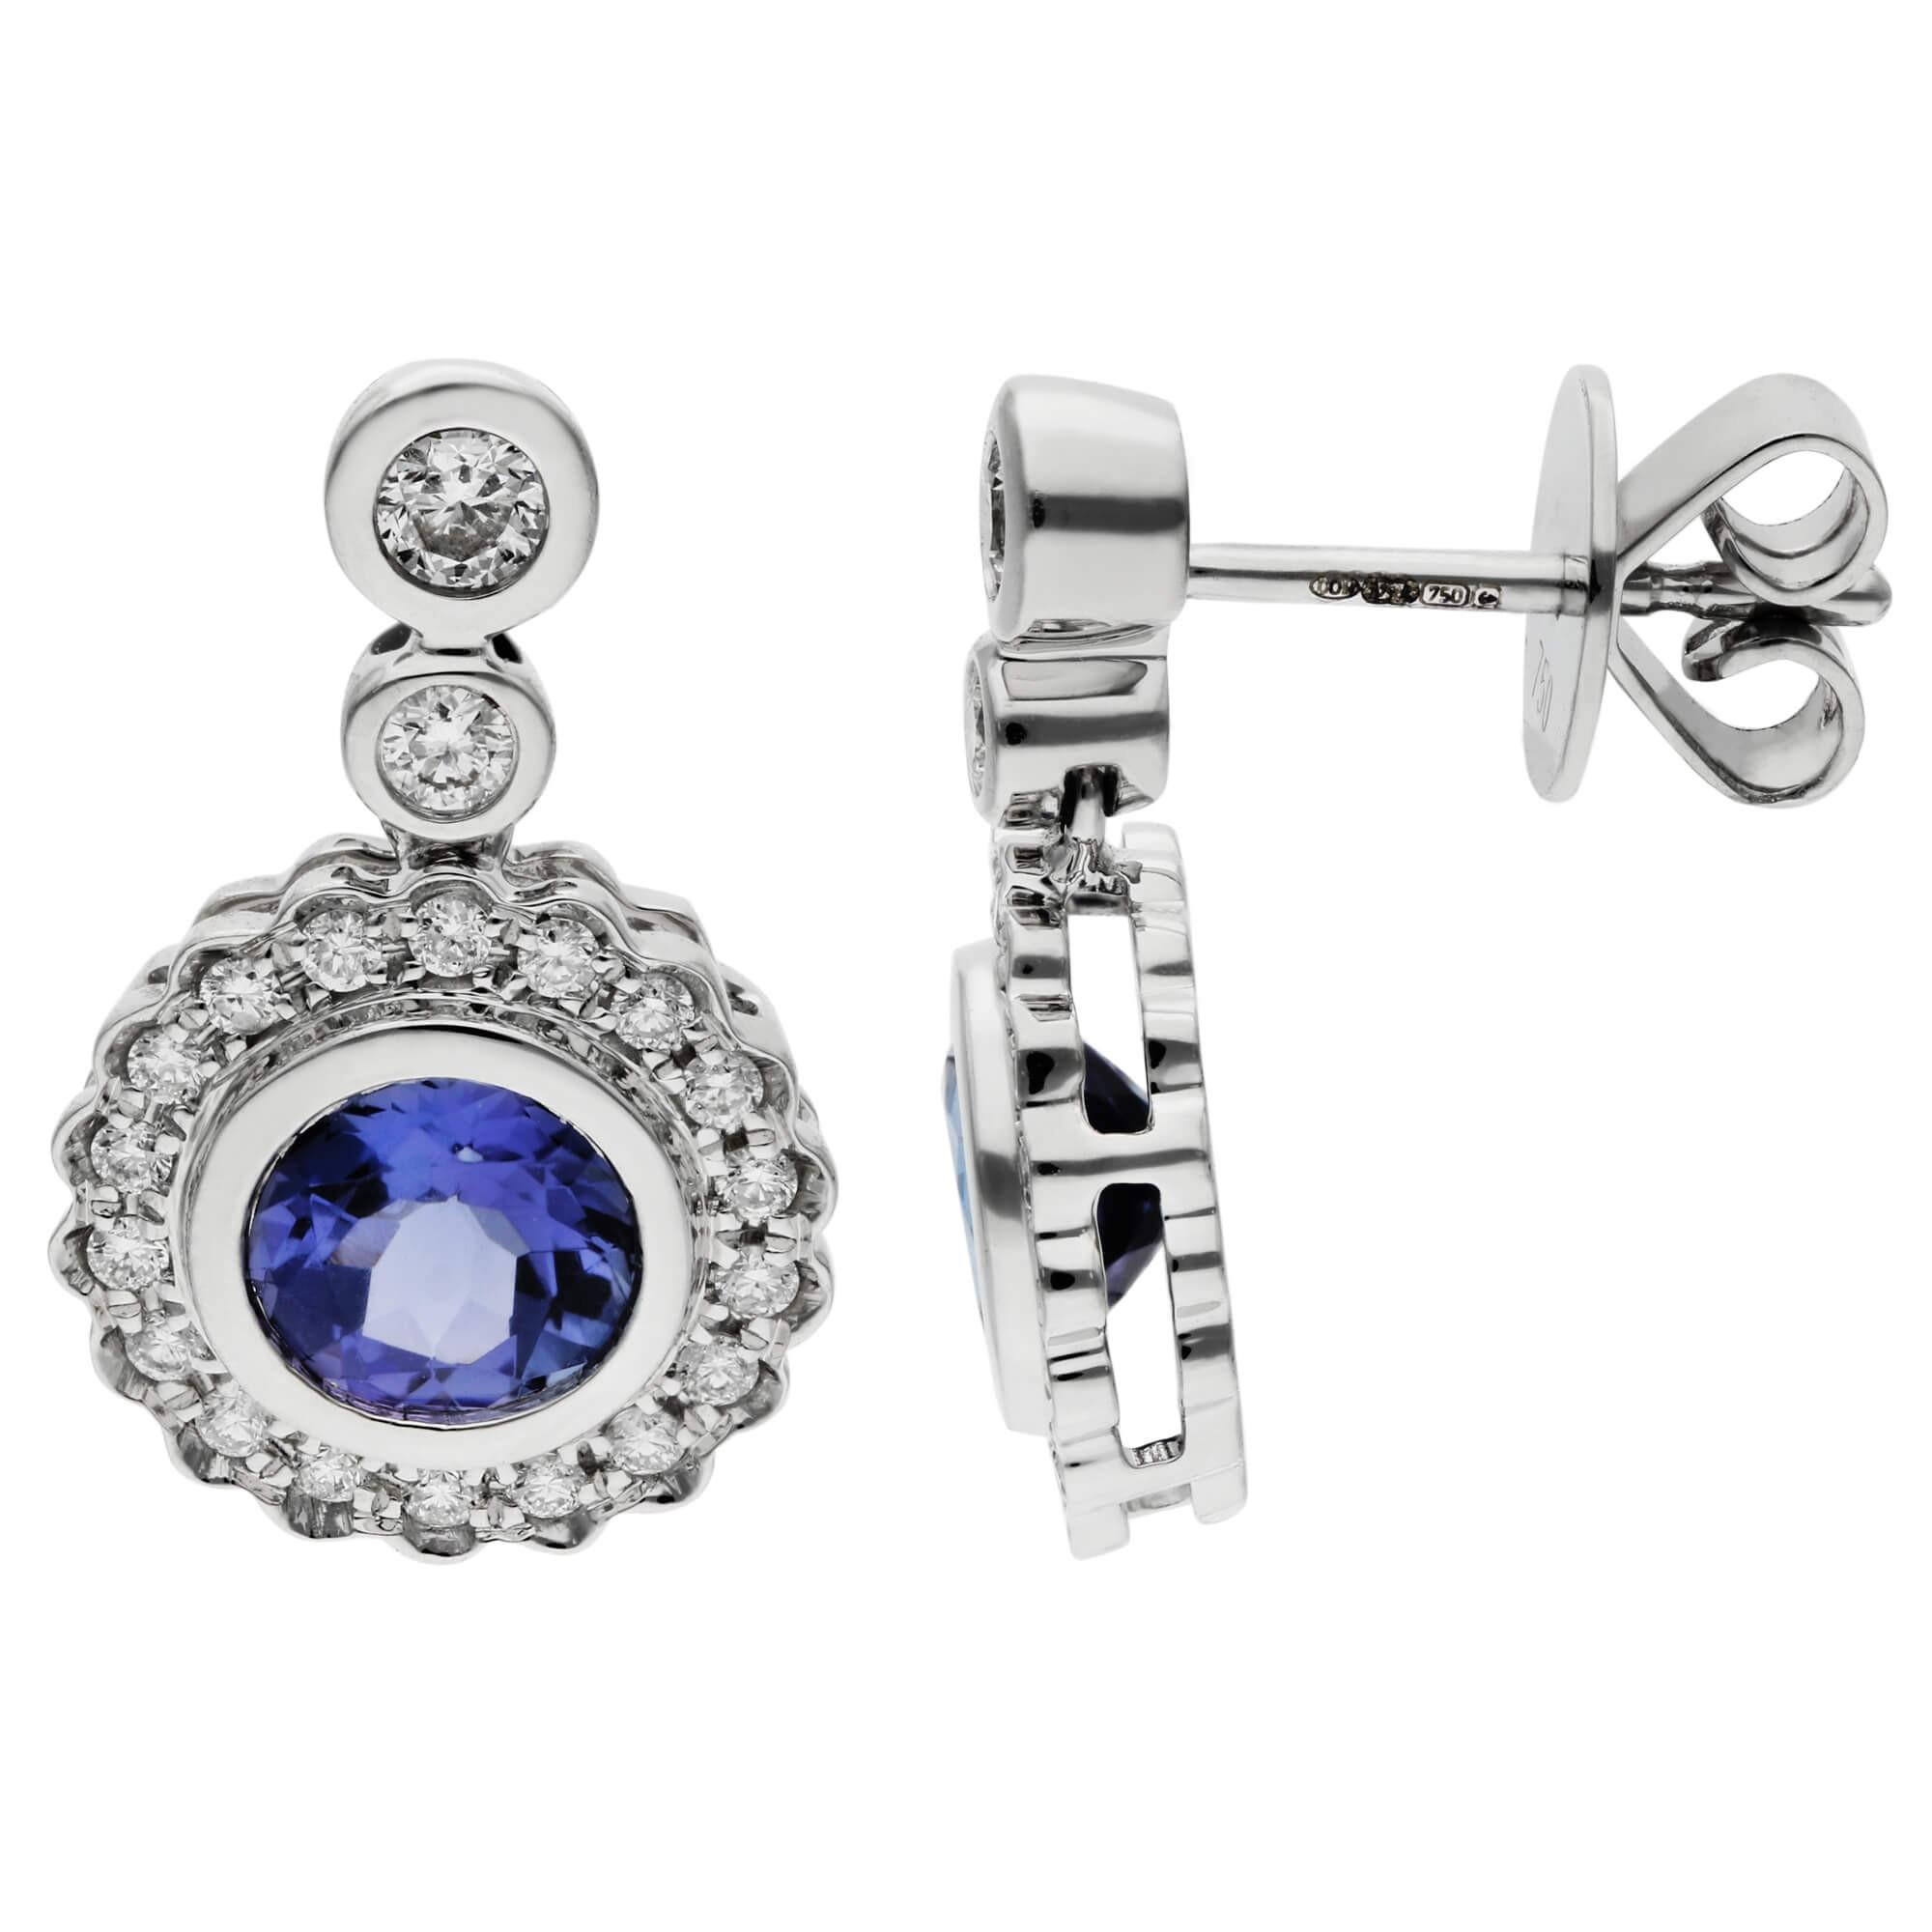 18ct White Gold 1.00ct Tanzanite & 0.45ct Diamond Halo Drop Earrings

Experience the allure of our 18ct White Gold Tanzanite & Diamond Halo Drop Earrings, where luxury and elegance meet. Each earring showcases a mesmerizing round, bezel-set